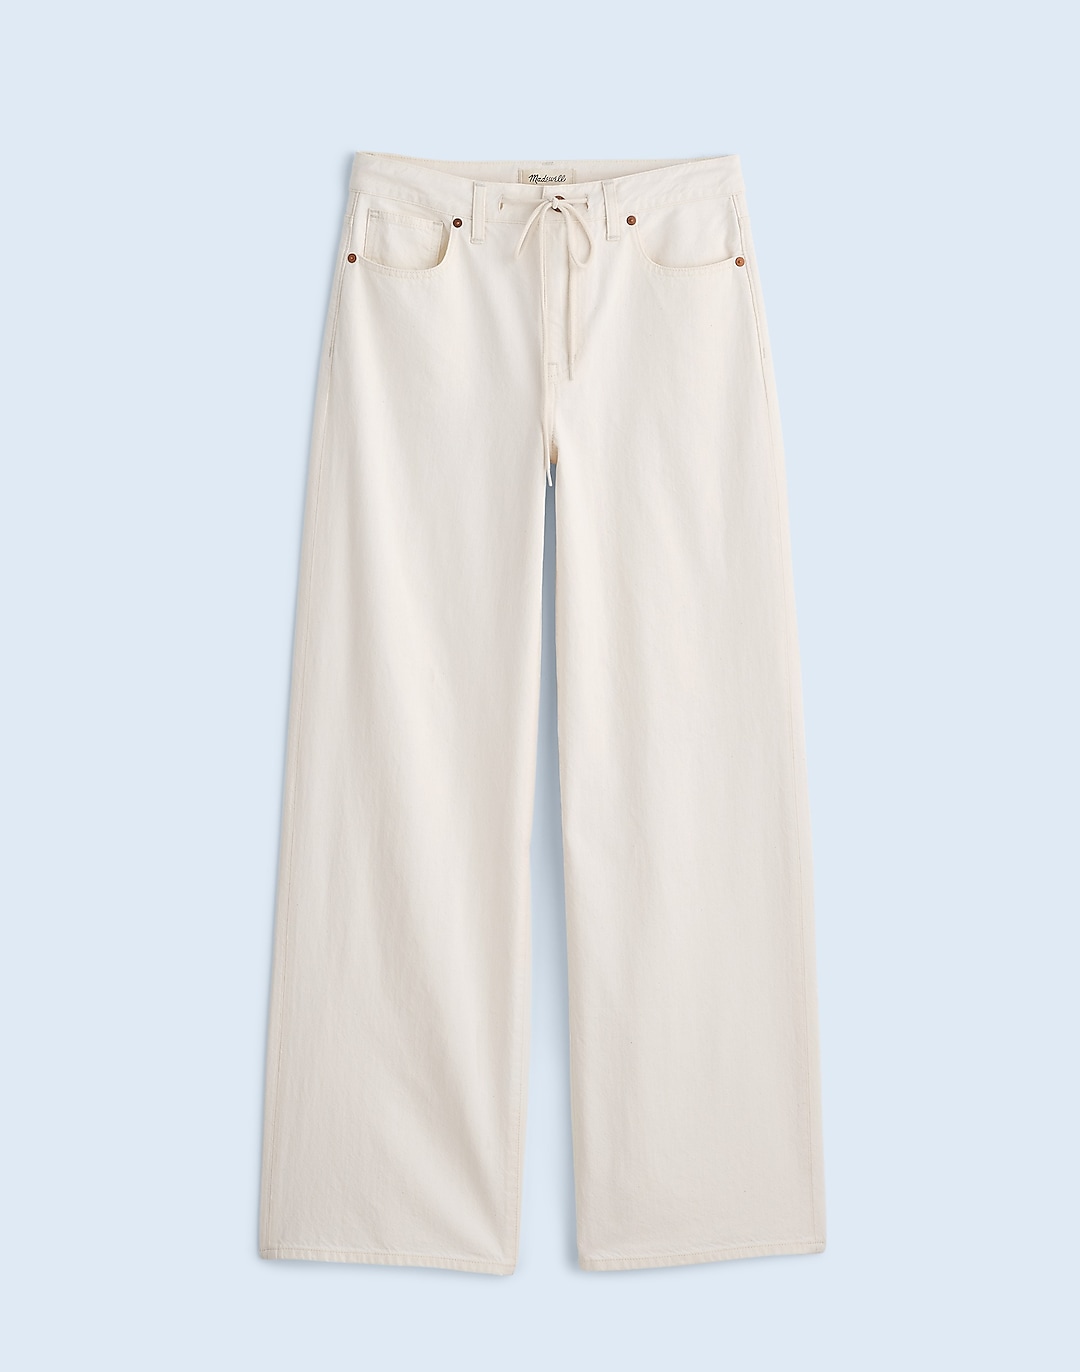 Superwide-Leg Jeans in Vintage Canvas: Drawstring Edition | Madewell